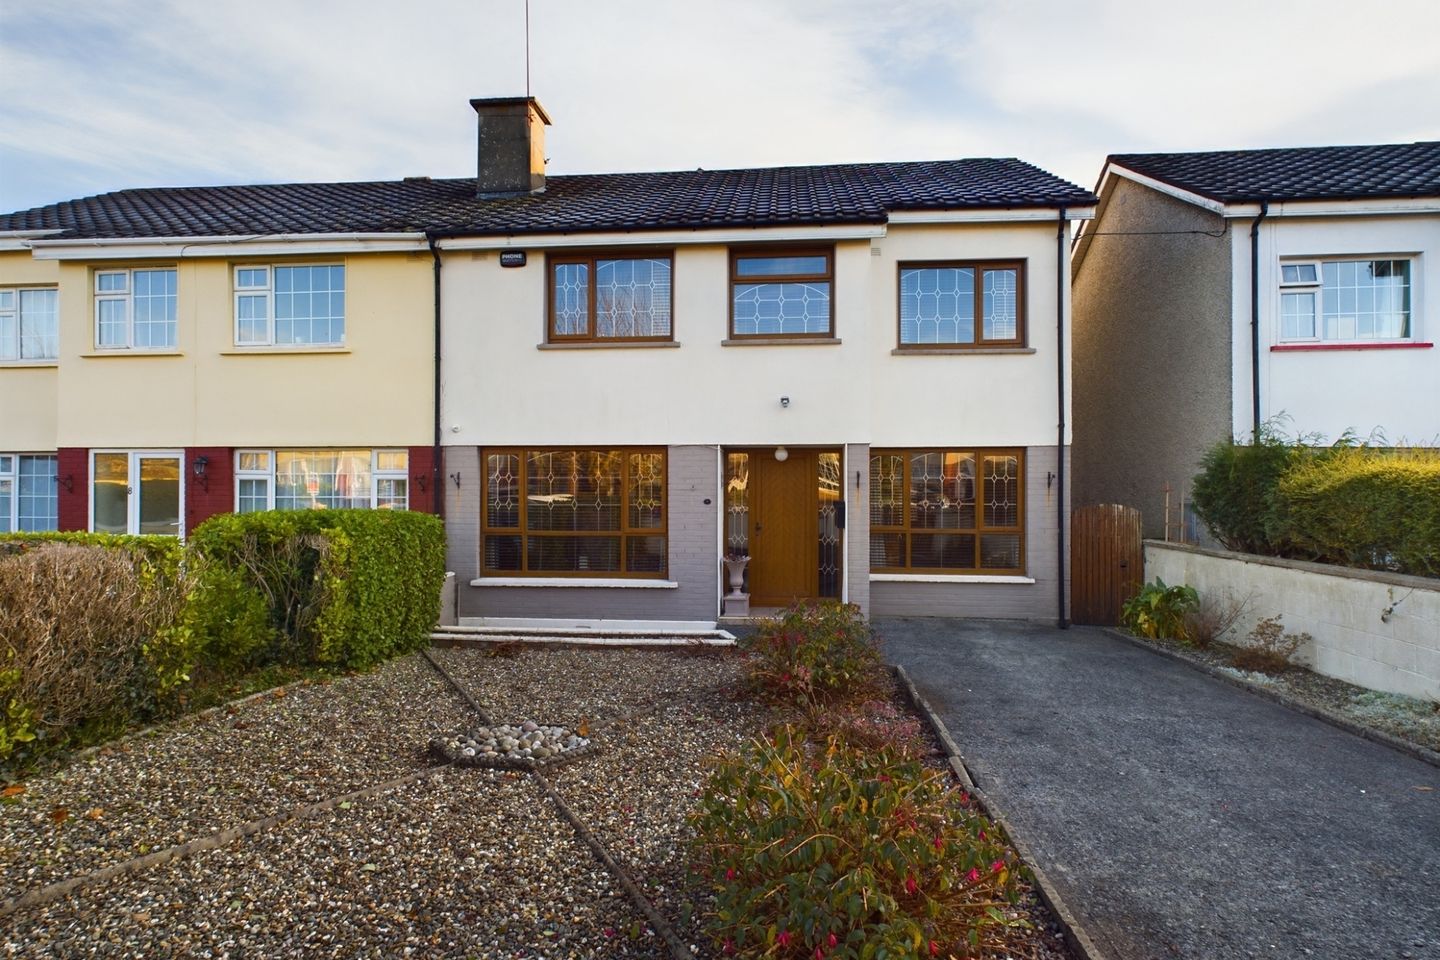 9 Cluain A Laoi, Cork Road, Waterford, Waterford City, Co. Waterford, X91VPA9